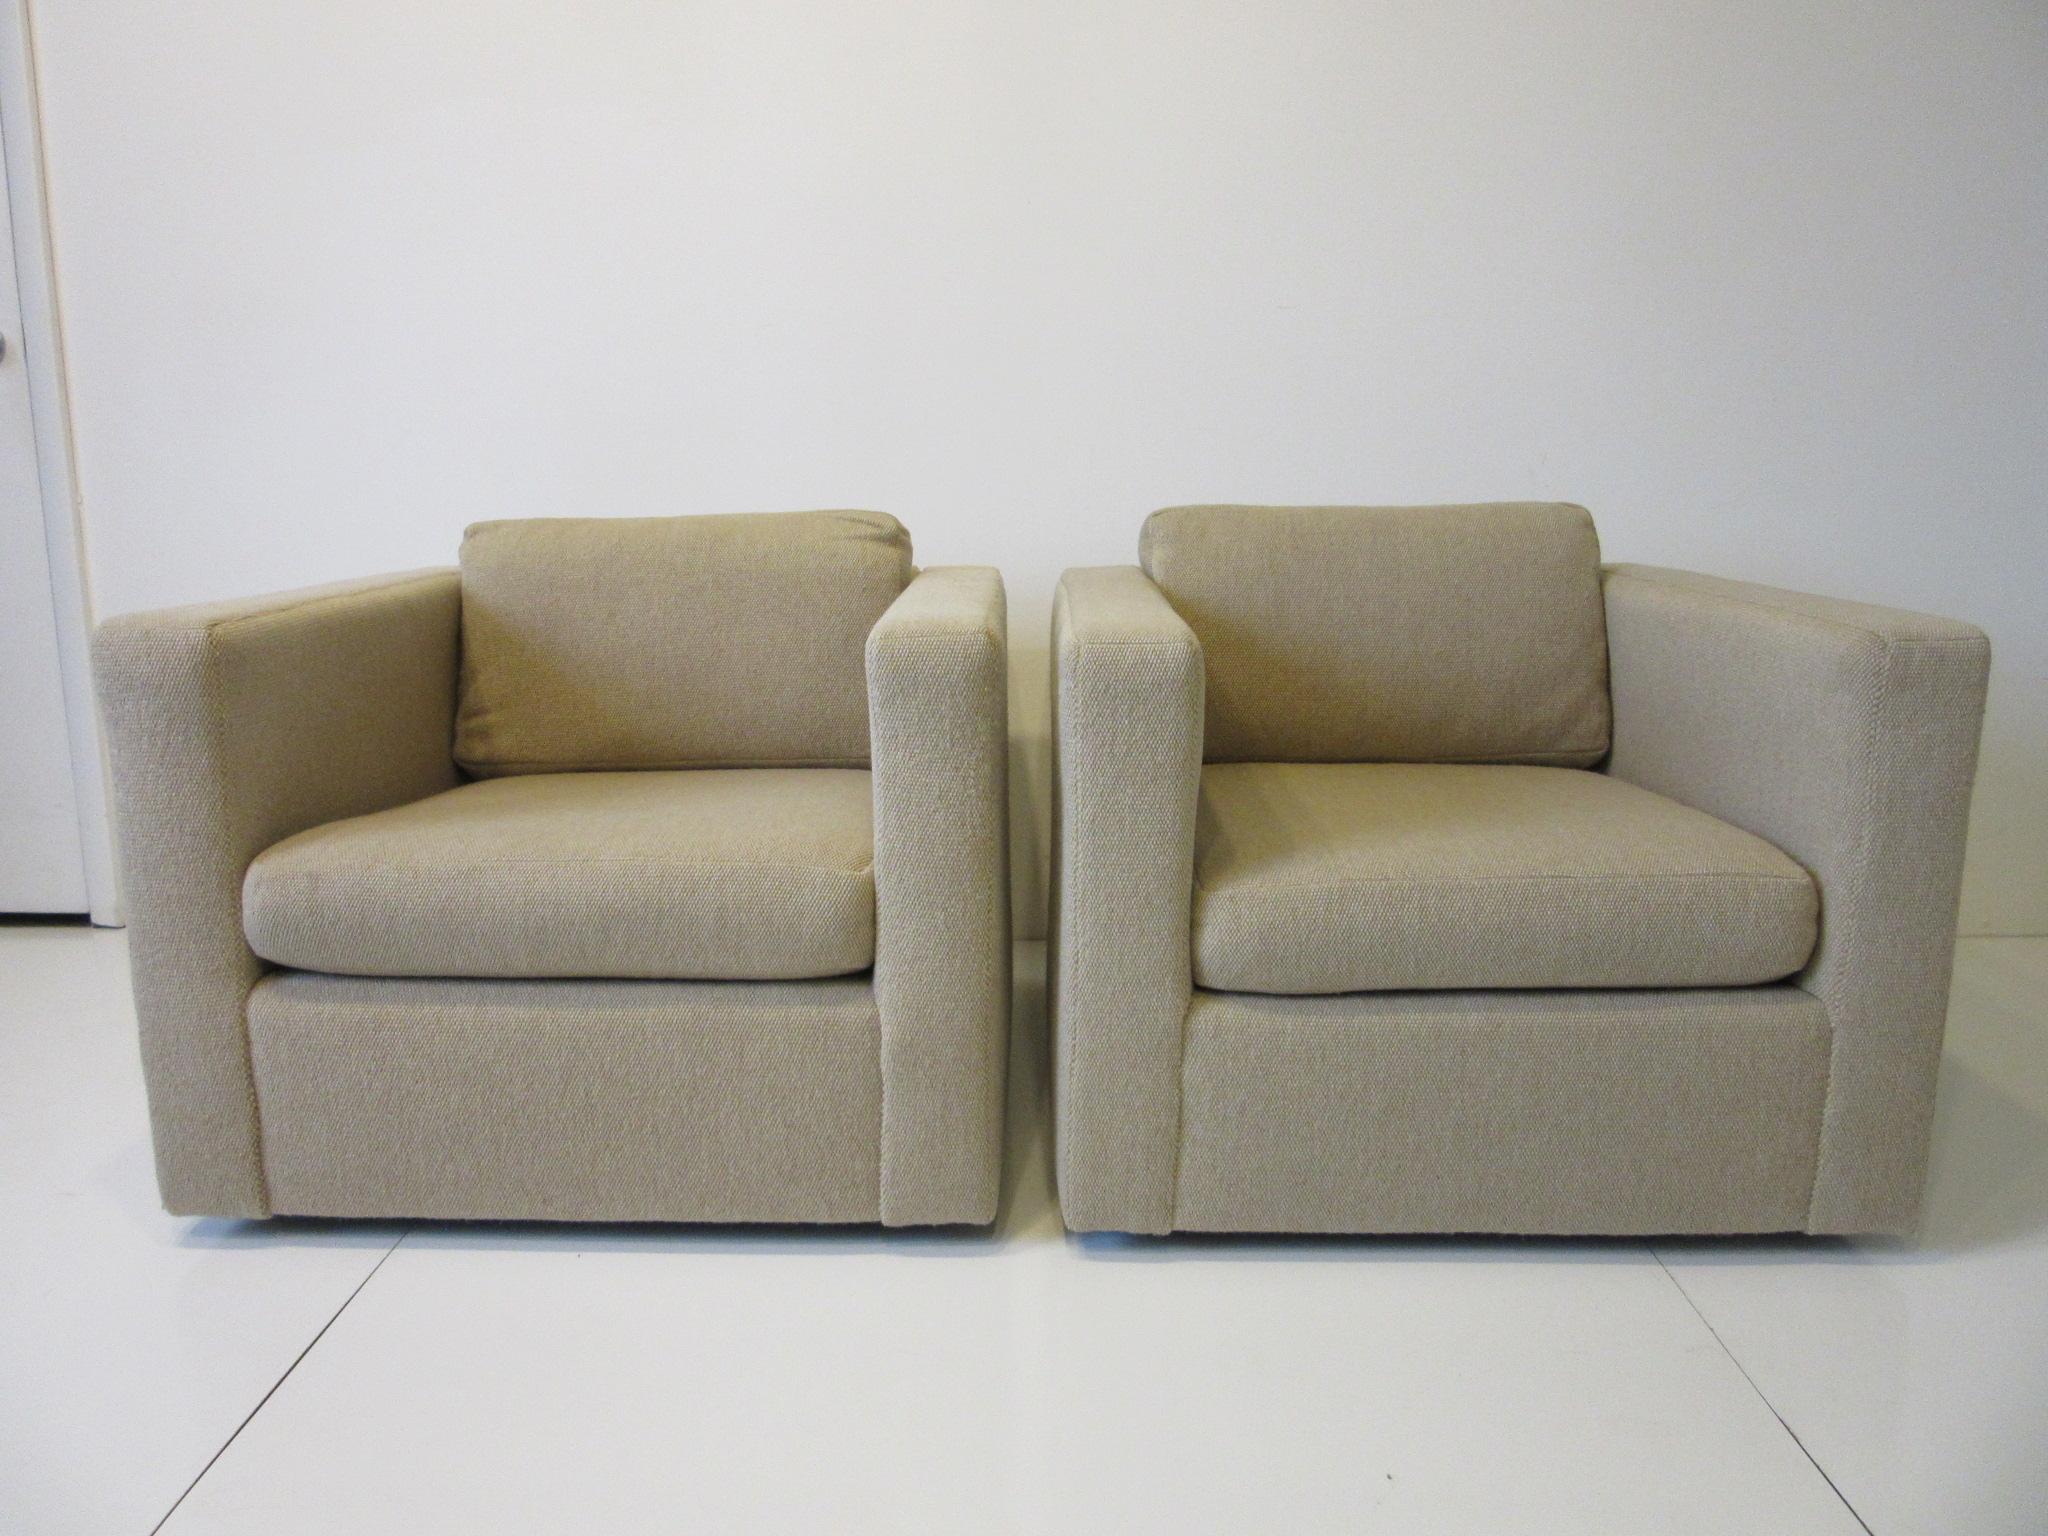 A pair of two cushion cube lounge chairs with tightly woven contract fabric in a sandy beige tone having low wood legs keeping the piece floating off the floor. Retains the manufactures label by the Thayer Coggin furniture company, a simple design